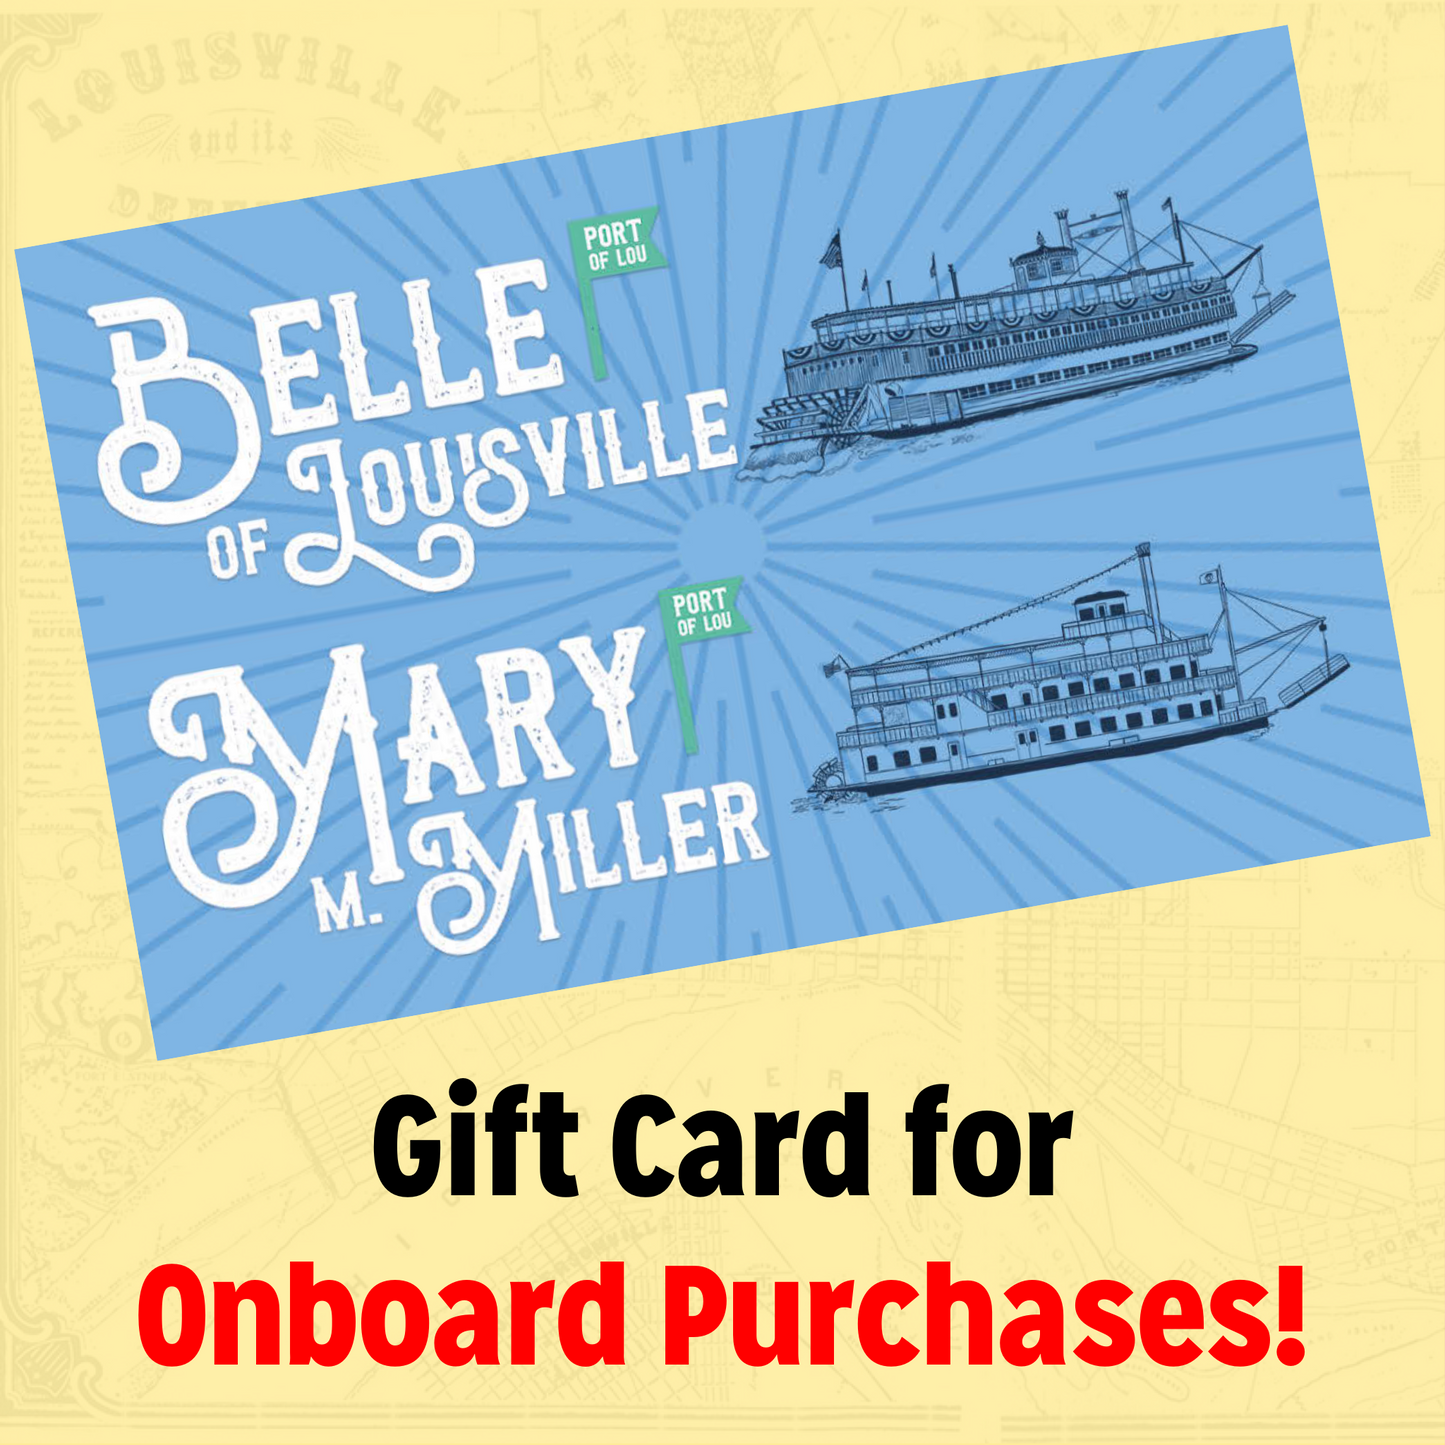 Belle of Louisville Riverboats Onboard Gift Card